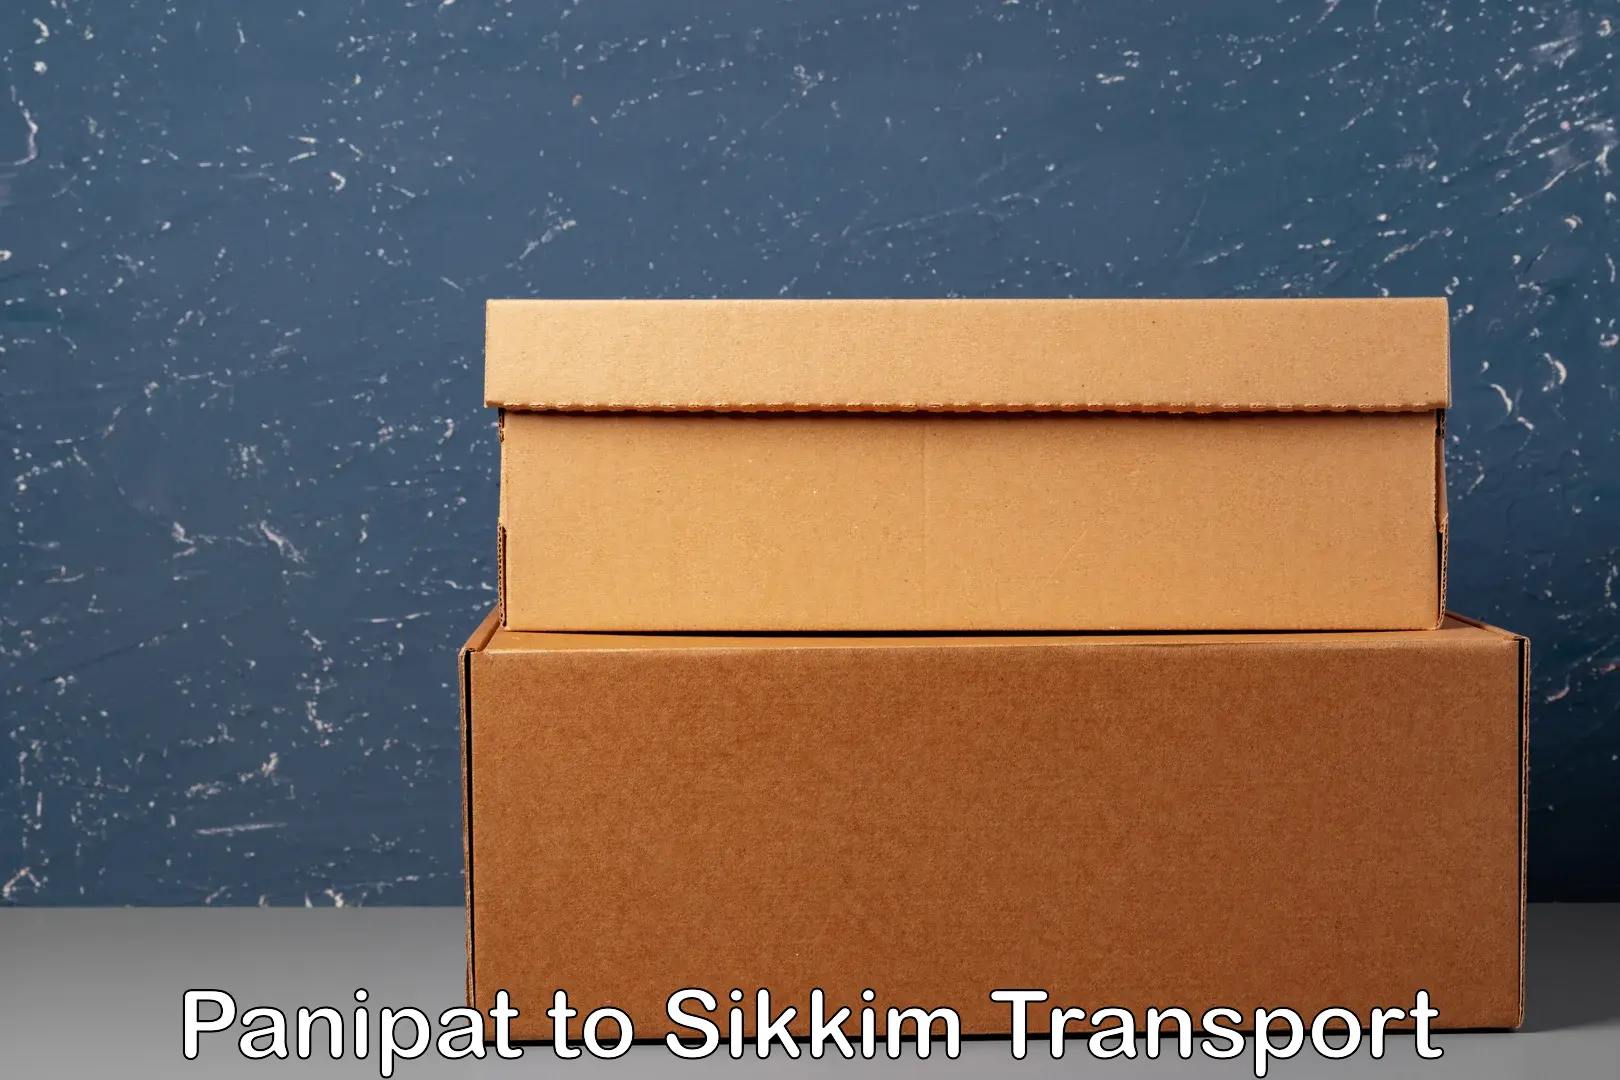 Container transport service Panipat to East Sikkim